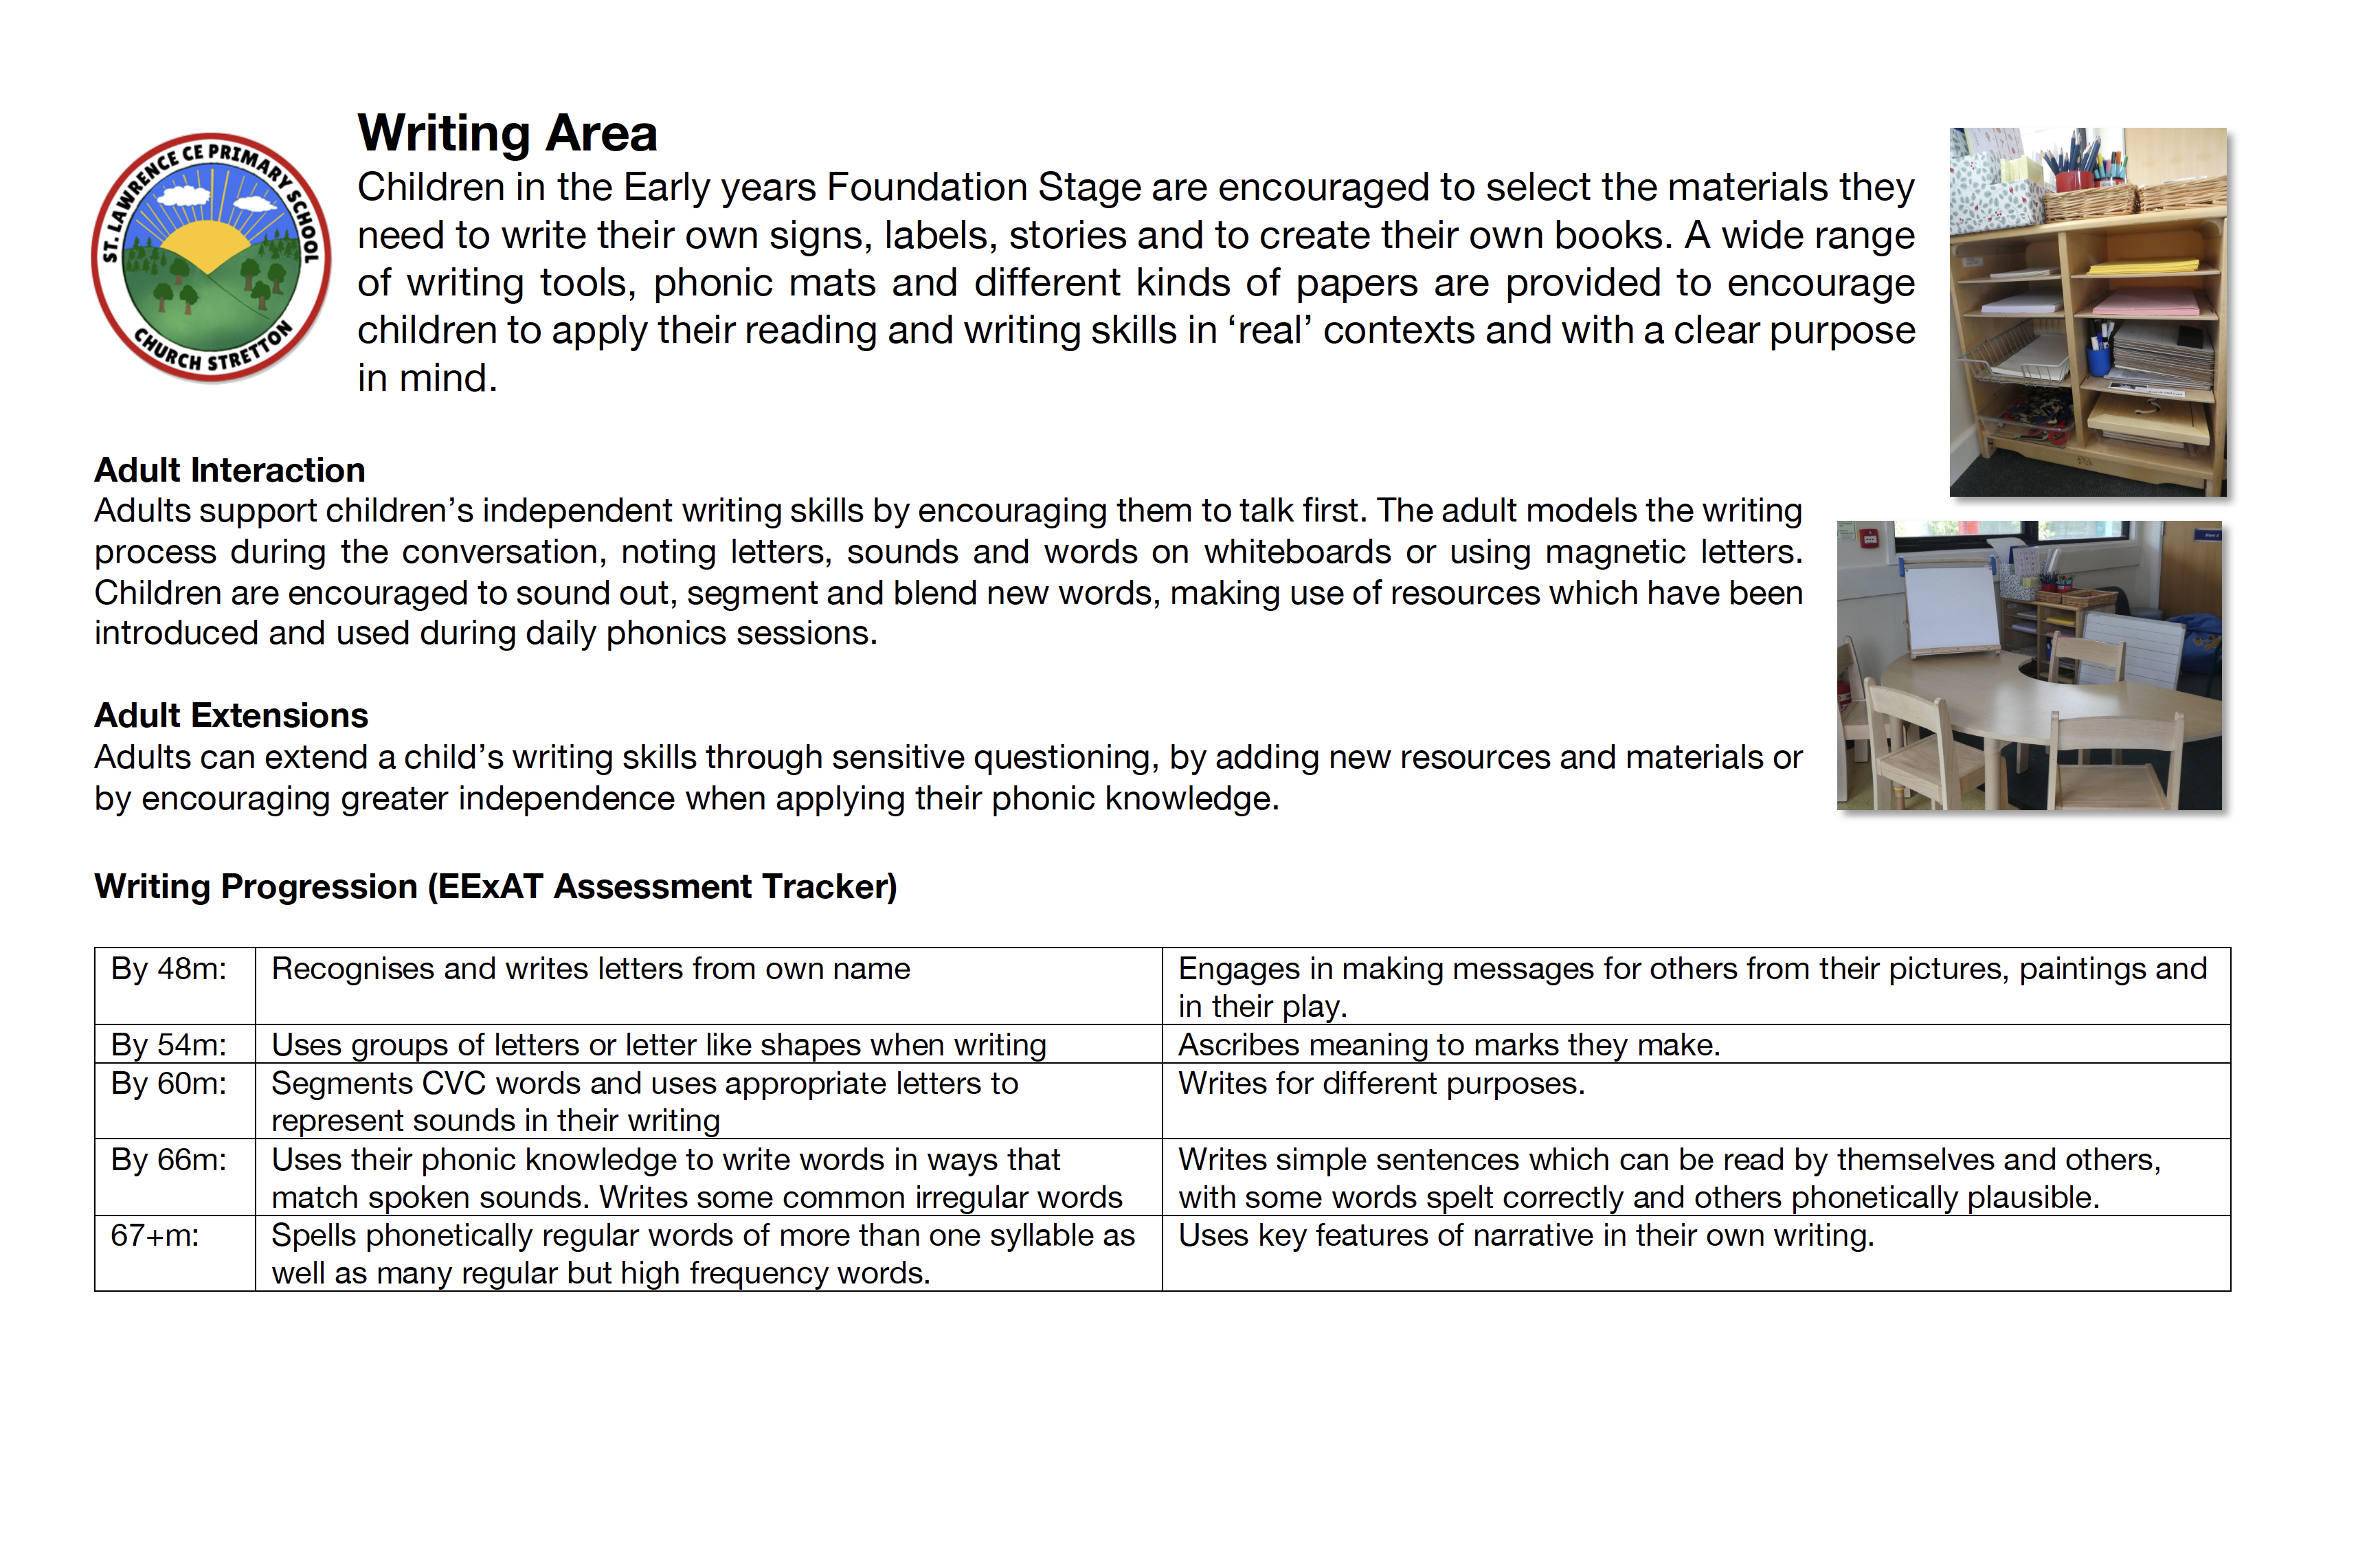 Continuous Provision - Writing Area